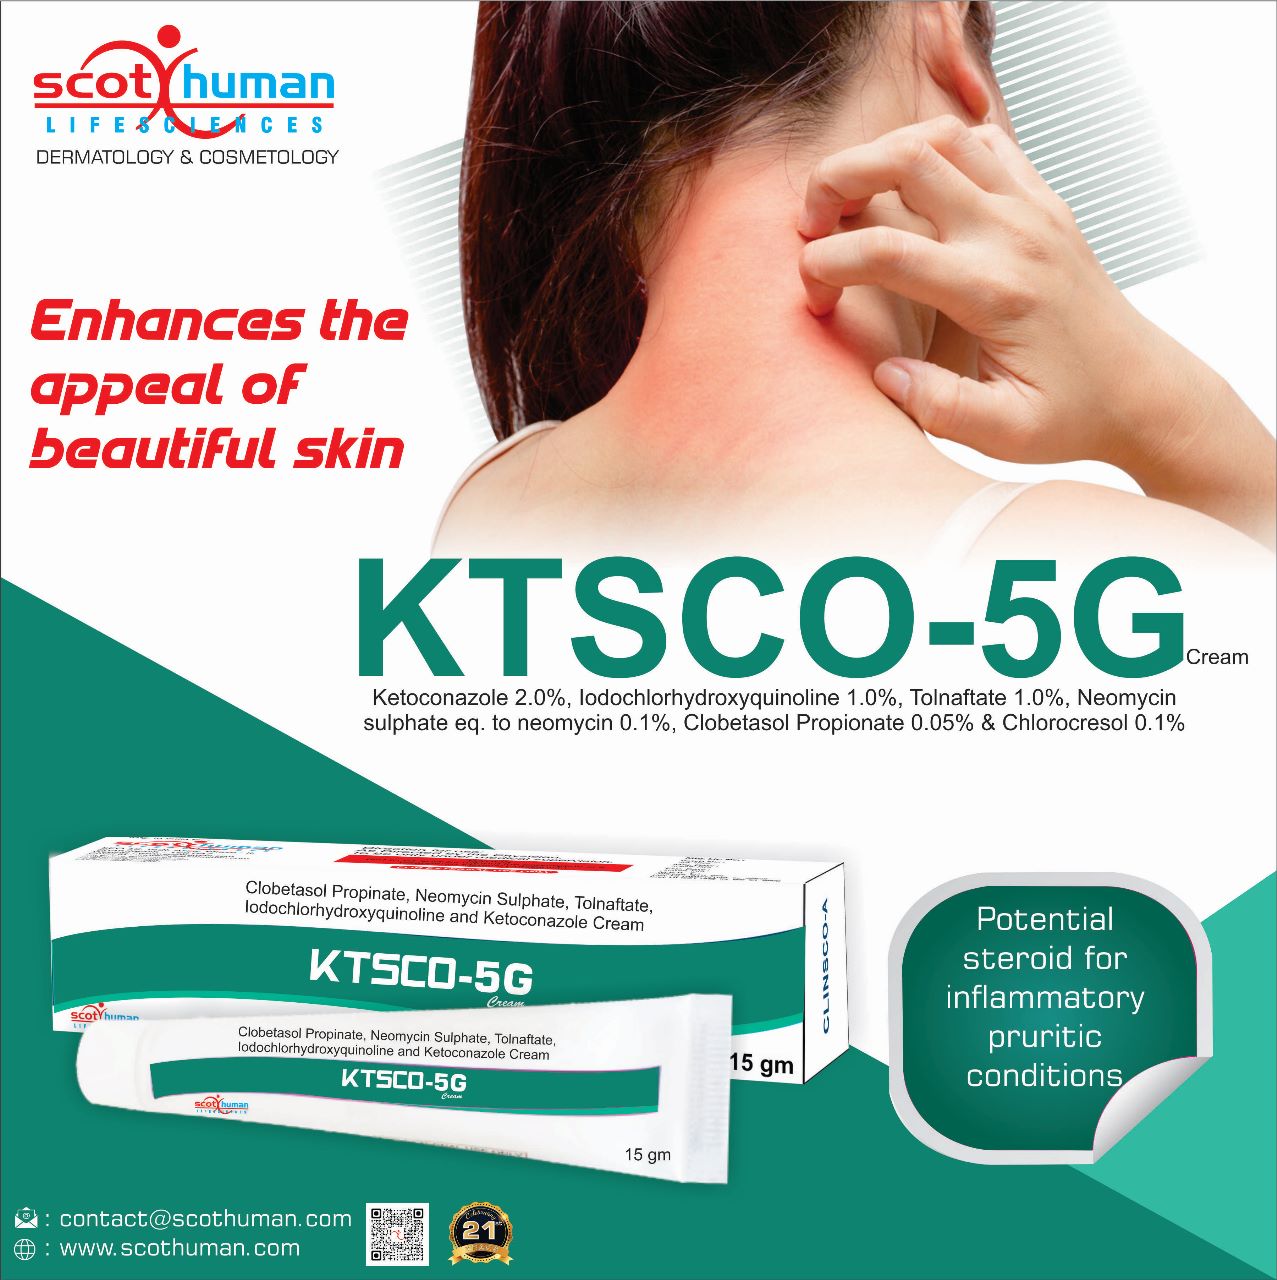 Product Name: Ktsco 5g, Compositions of Ktsco 5g are Clobestol propionate,Neomycin sulphate,ketoconazole,Iodochlorhydroxyquinione,Tolnaftate - Pharma Drugs and Chemicals